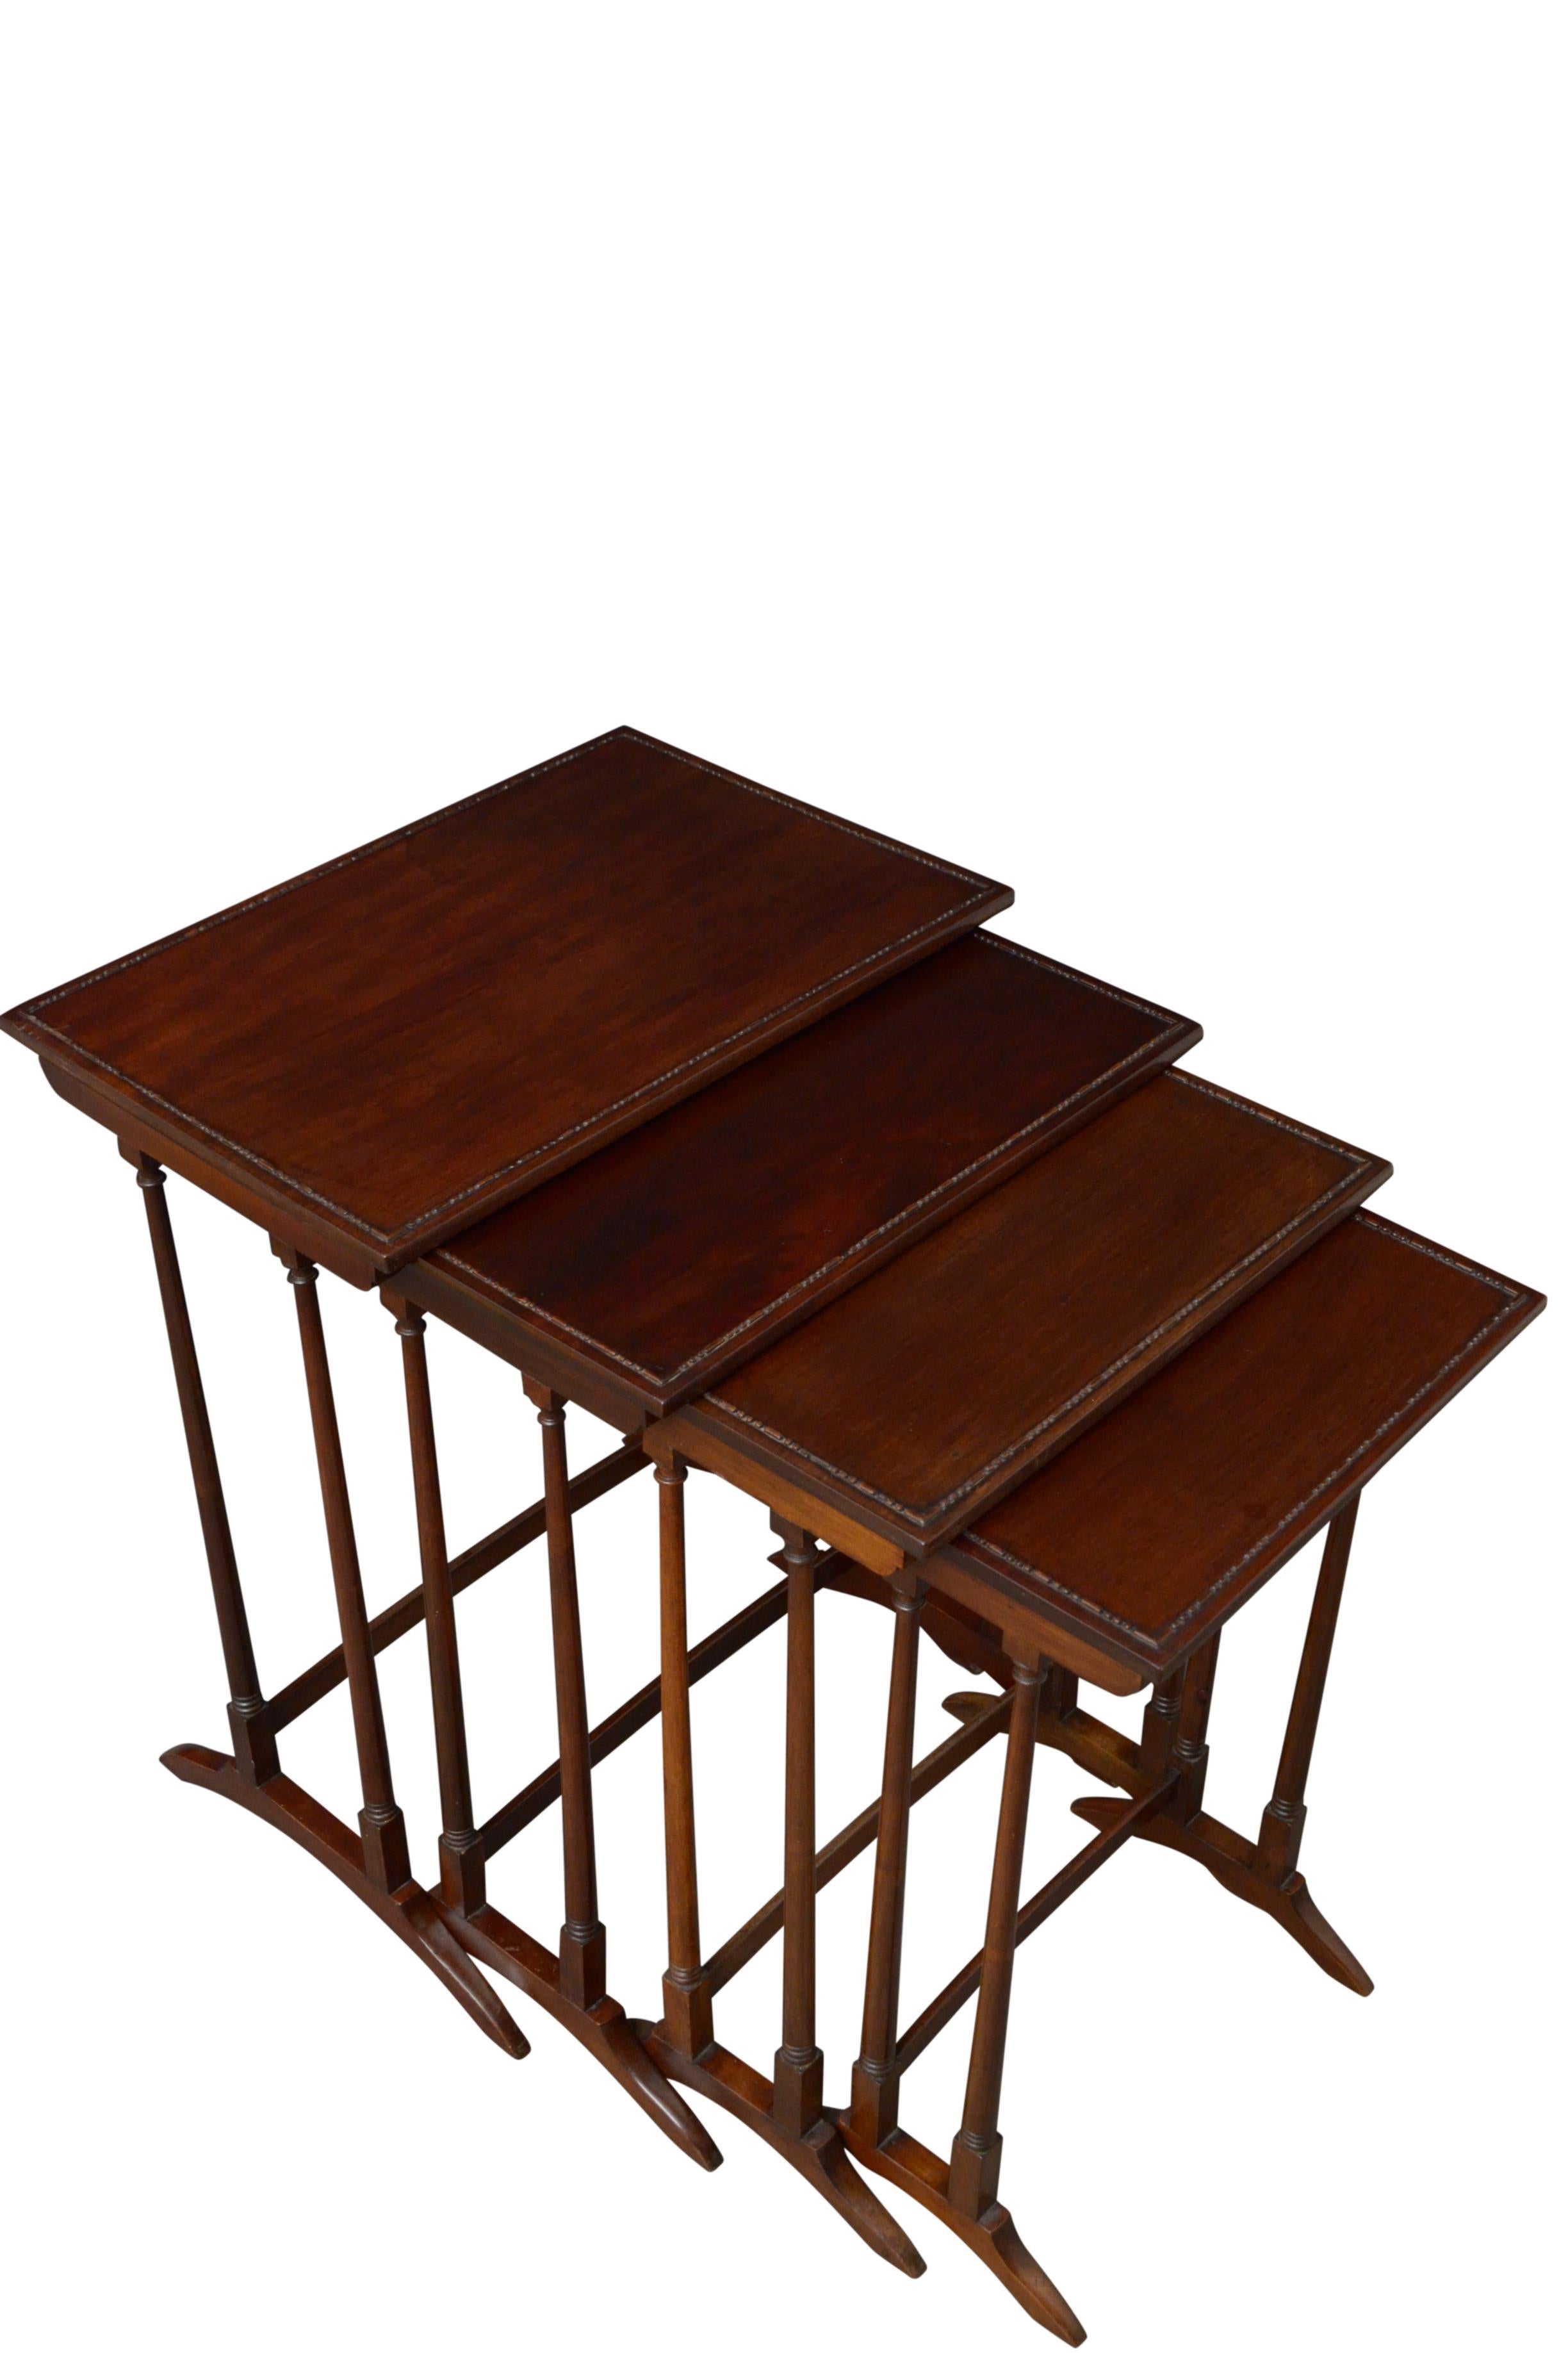 K0501 Fine quality Edwardian nest of four tables in figured mahogany, each with figured mahogany top with carved decoration, standing on slender turned legs terminating in downswept feet united by a stretcher. This antique nest of tables came from a